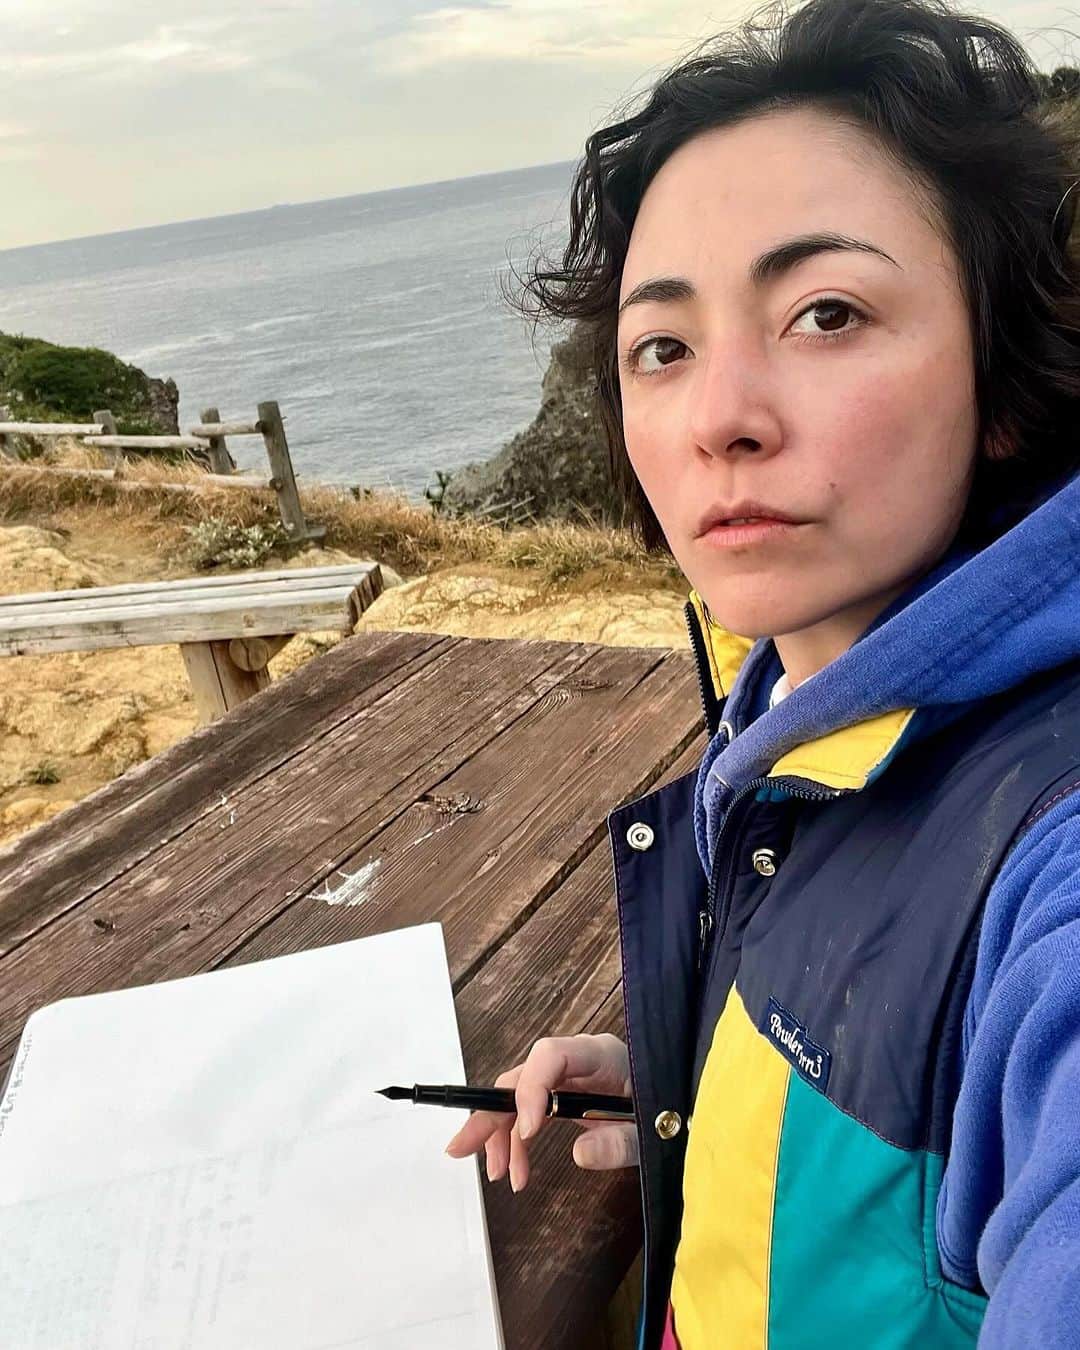 美波さんのインスタグラム写真 - (美波Instagram)「Last time, I had a wonderful experience during my morning routine... I got up early, packed a picnic box and headed out for a hike. I had the pleasure of having breakfast at the top of the hill (it wasn't too high). Then I had the pleasure of starting to write my journal... It was an amazing experience to re-center myself at the top of the mountain. Then I jumped into the ocean and had a swim... it was frozen but it felt like all the molecules had woken up. what a beautiful start to the day 😍 The more we observe nature, the more we can refocus. The more you melt into nature, the more every little bullshit in life starts to turn into nothing at all. I think I really need to feel more nature on those days.  この前、朝の日課で素敵な体験をした。 早起きして、ピクニック用のご飯を作り、ハイキングに出かけた。丘の頂上で朝食をとり（それほど高くはない）、それから日記を書き始めた。山の頂上で自分を見つめ直すことって今まで中々なかったから本当にいい経験だった。 それから海に飛び込んで泳いで...凍ったけど、すべての分子が目覚めたような感じがした。美しい一日の始まりだった。 自然を観察すればするほど、自分の軸とコネクトできる。 自然の中に溶け込めば溶け込むほど、人生における些細な戯言が何でもなくなる。 もっと自然を感じたいと思う今日この頃です。」12月13日 9時11分 - minamimanim